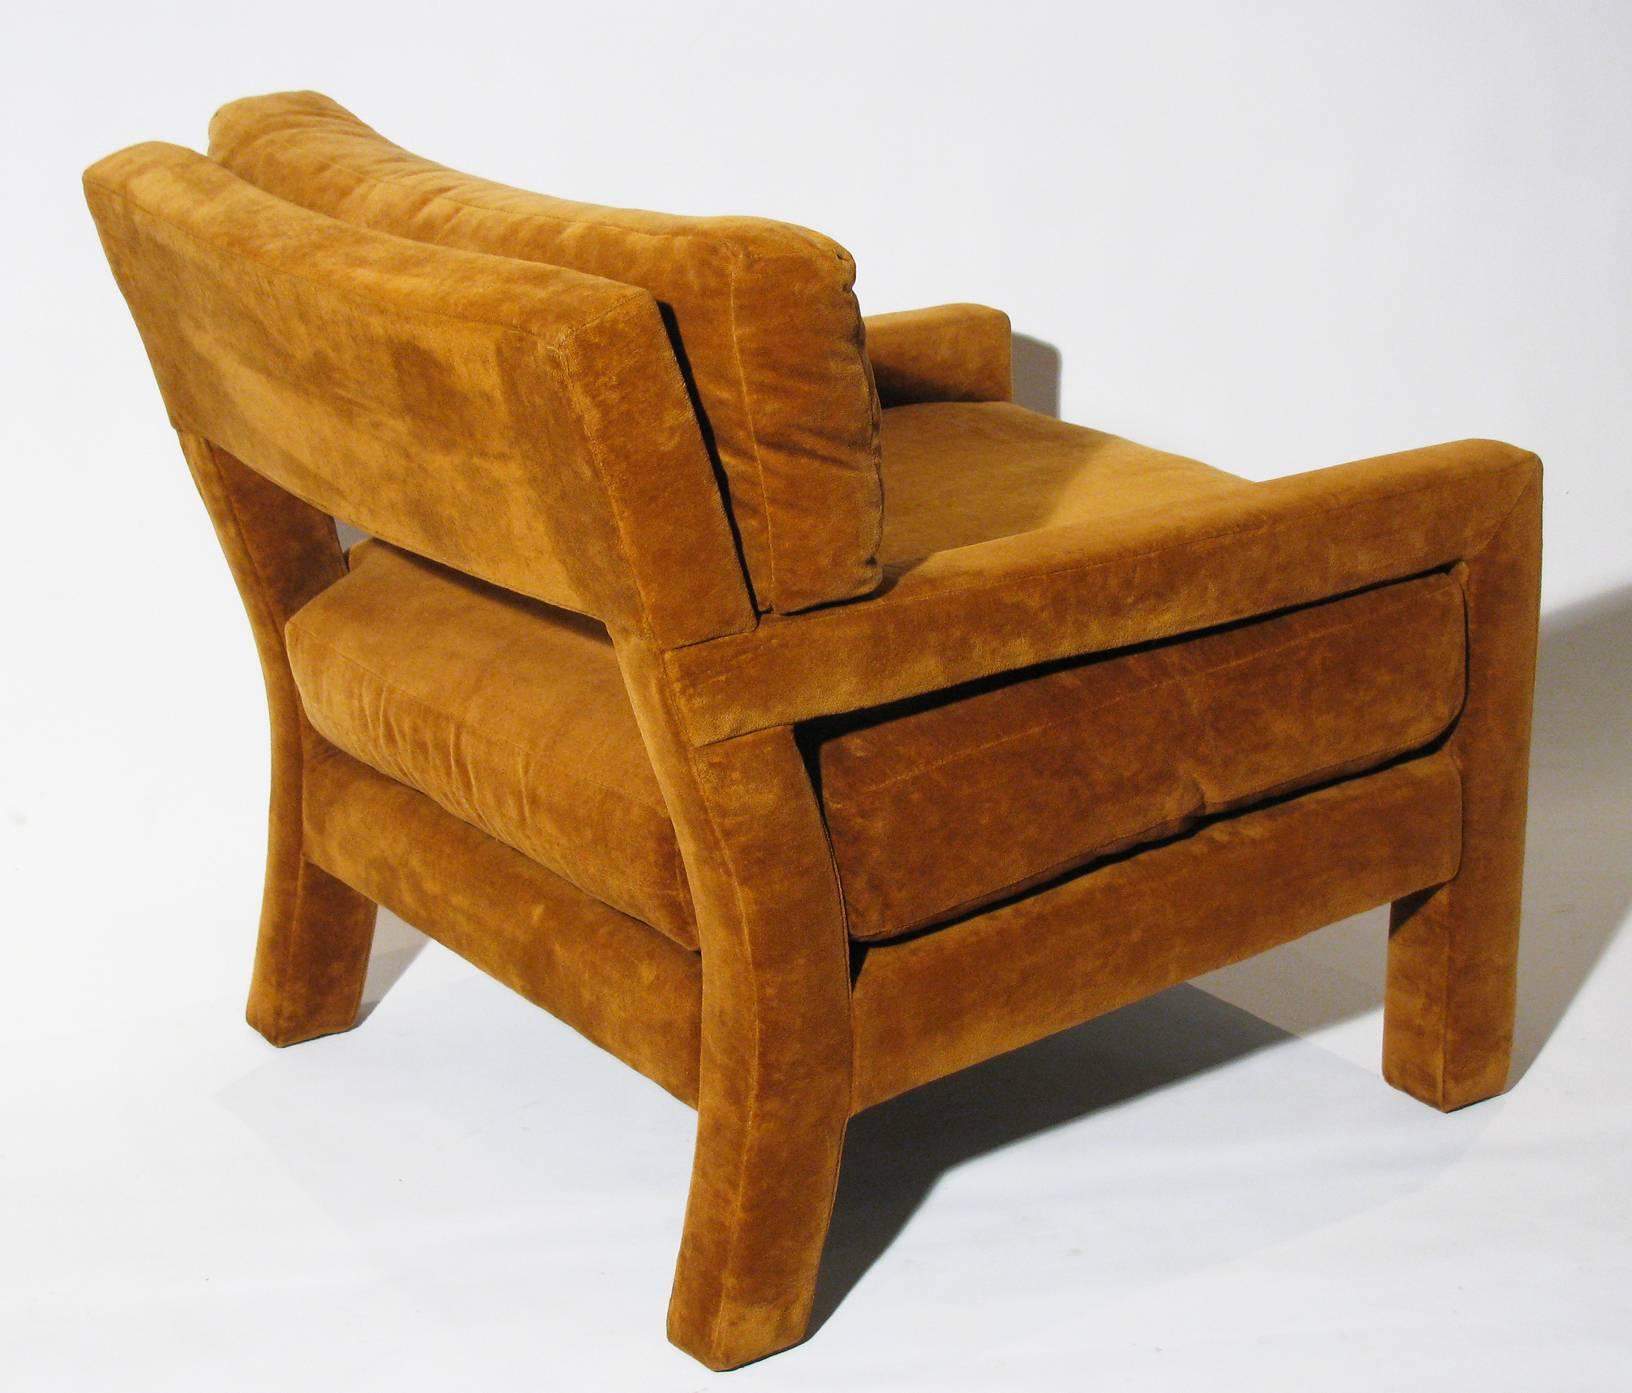 A pair of open-arm lounge chairs by Milo Baughman, in original dark camel color upholstery.